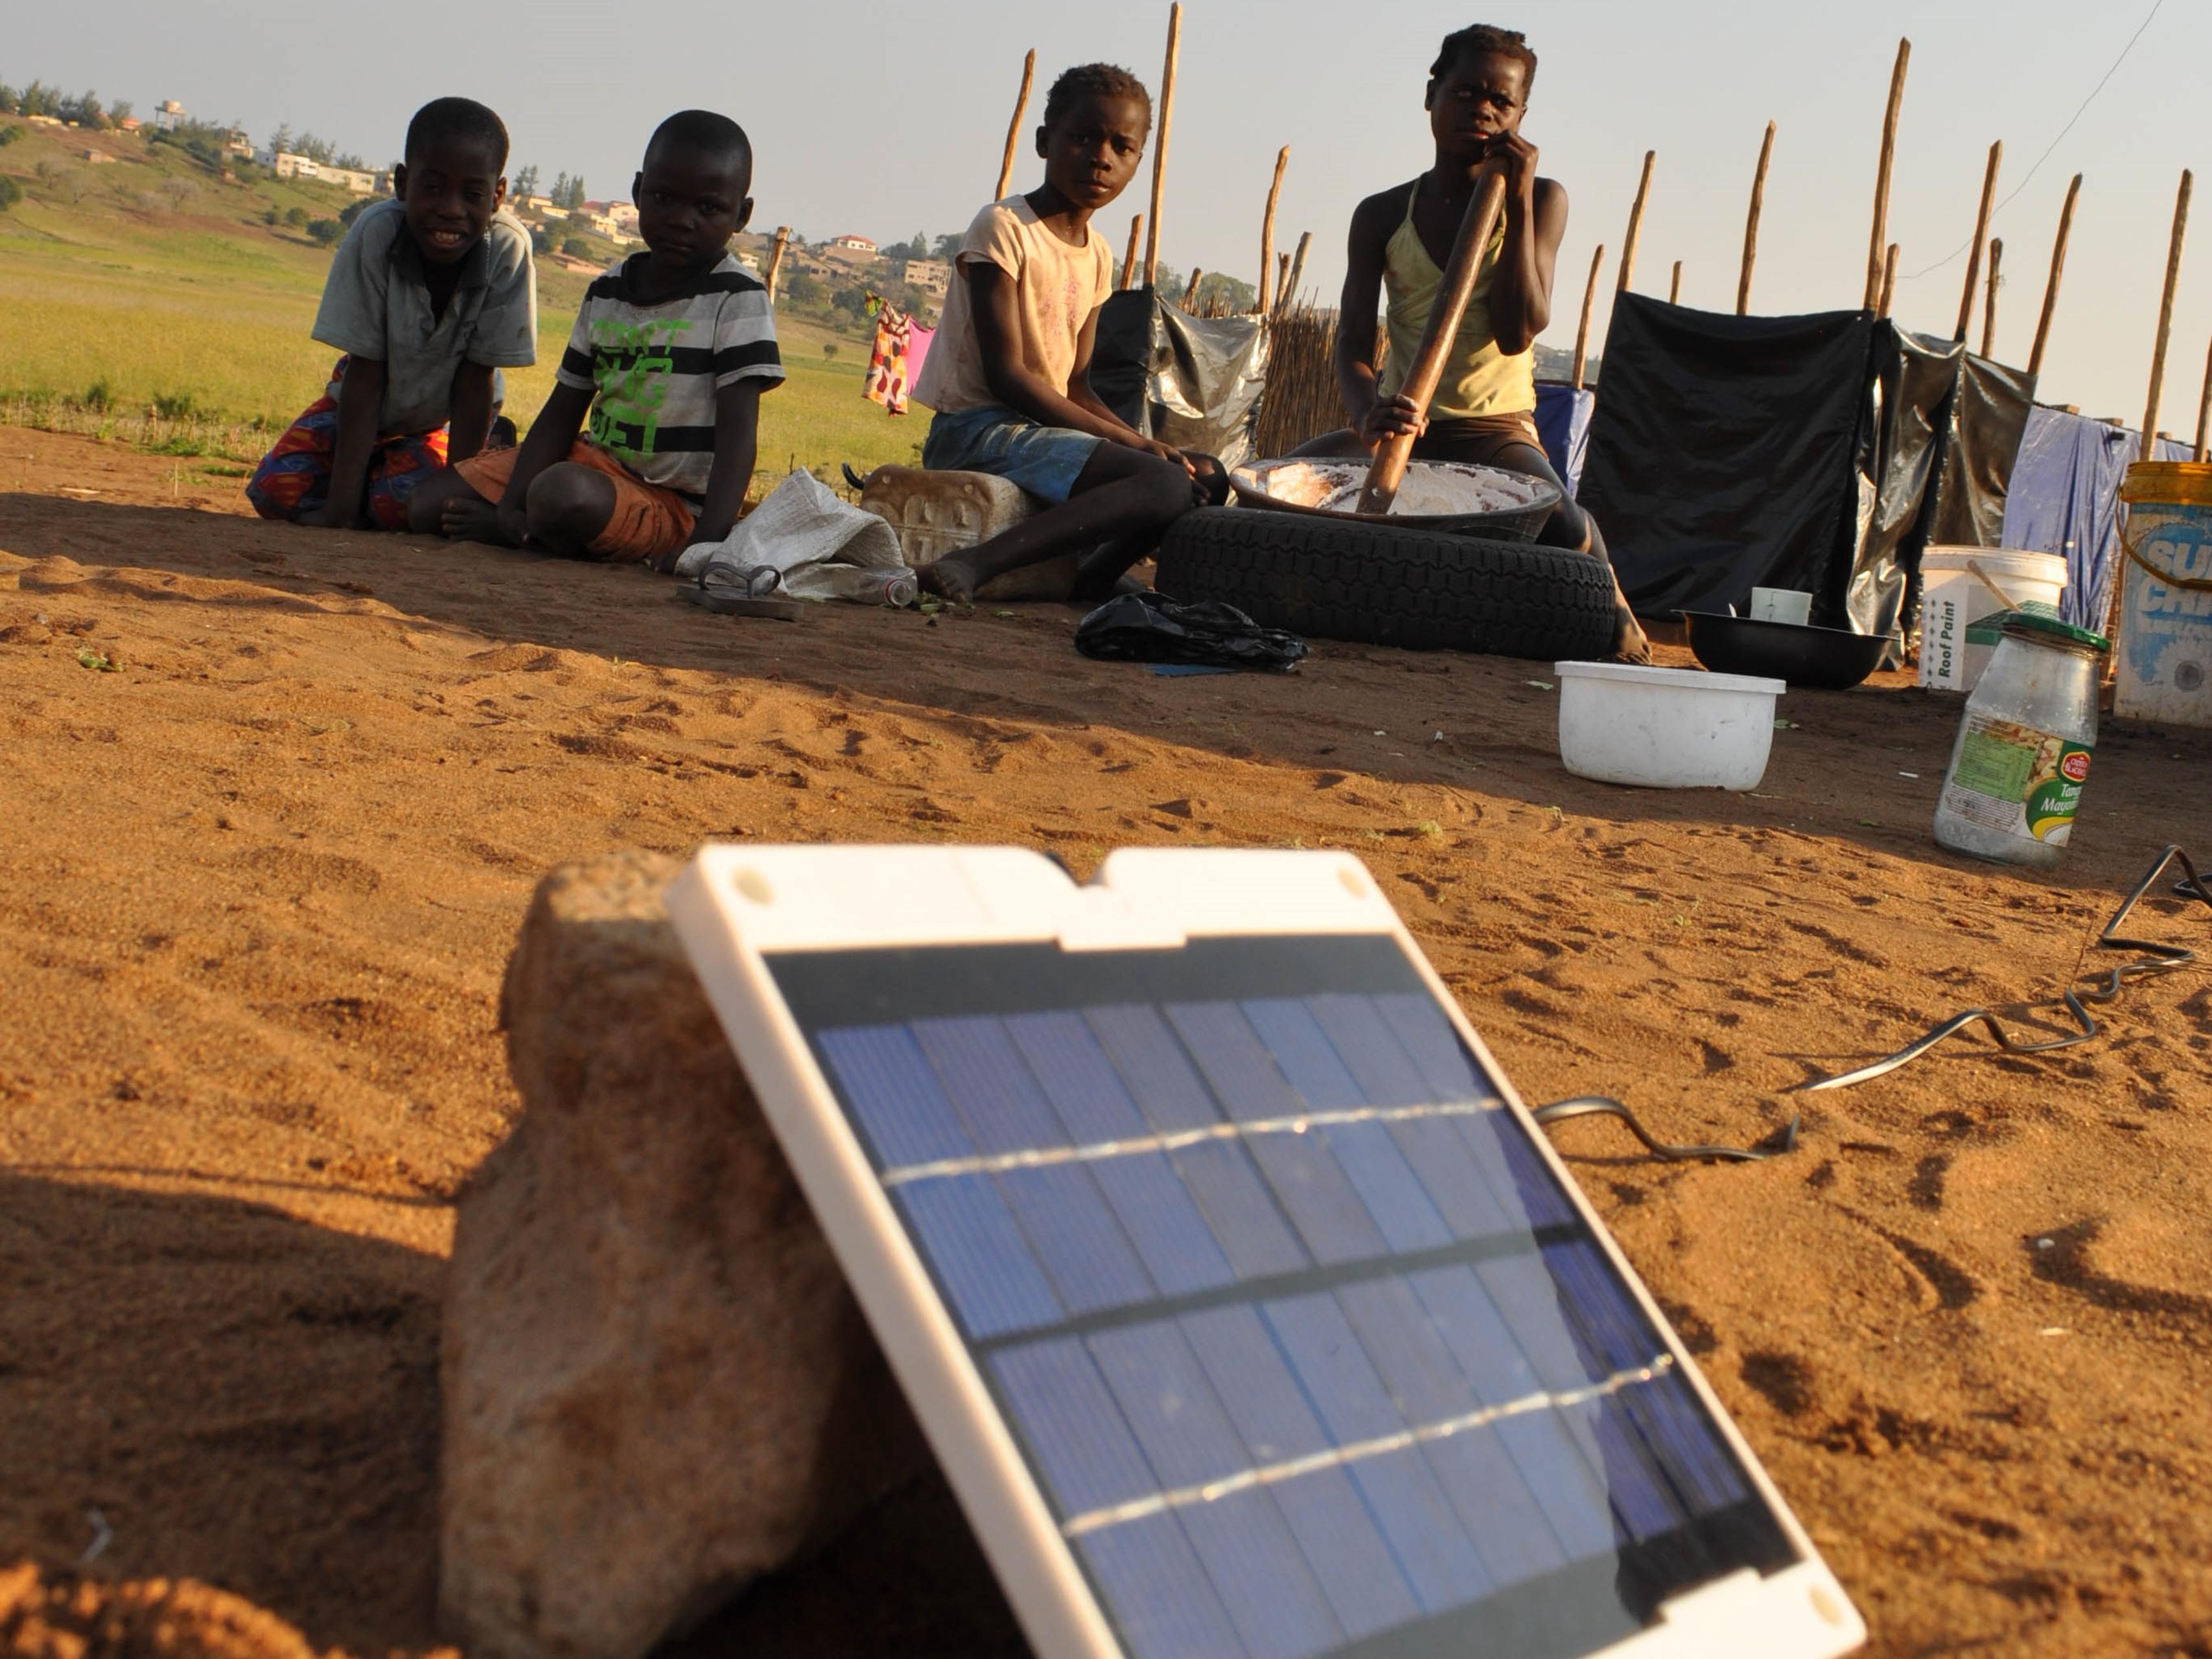 Solar cell energy in rural areas